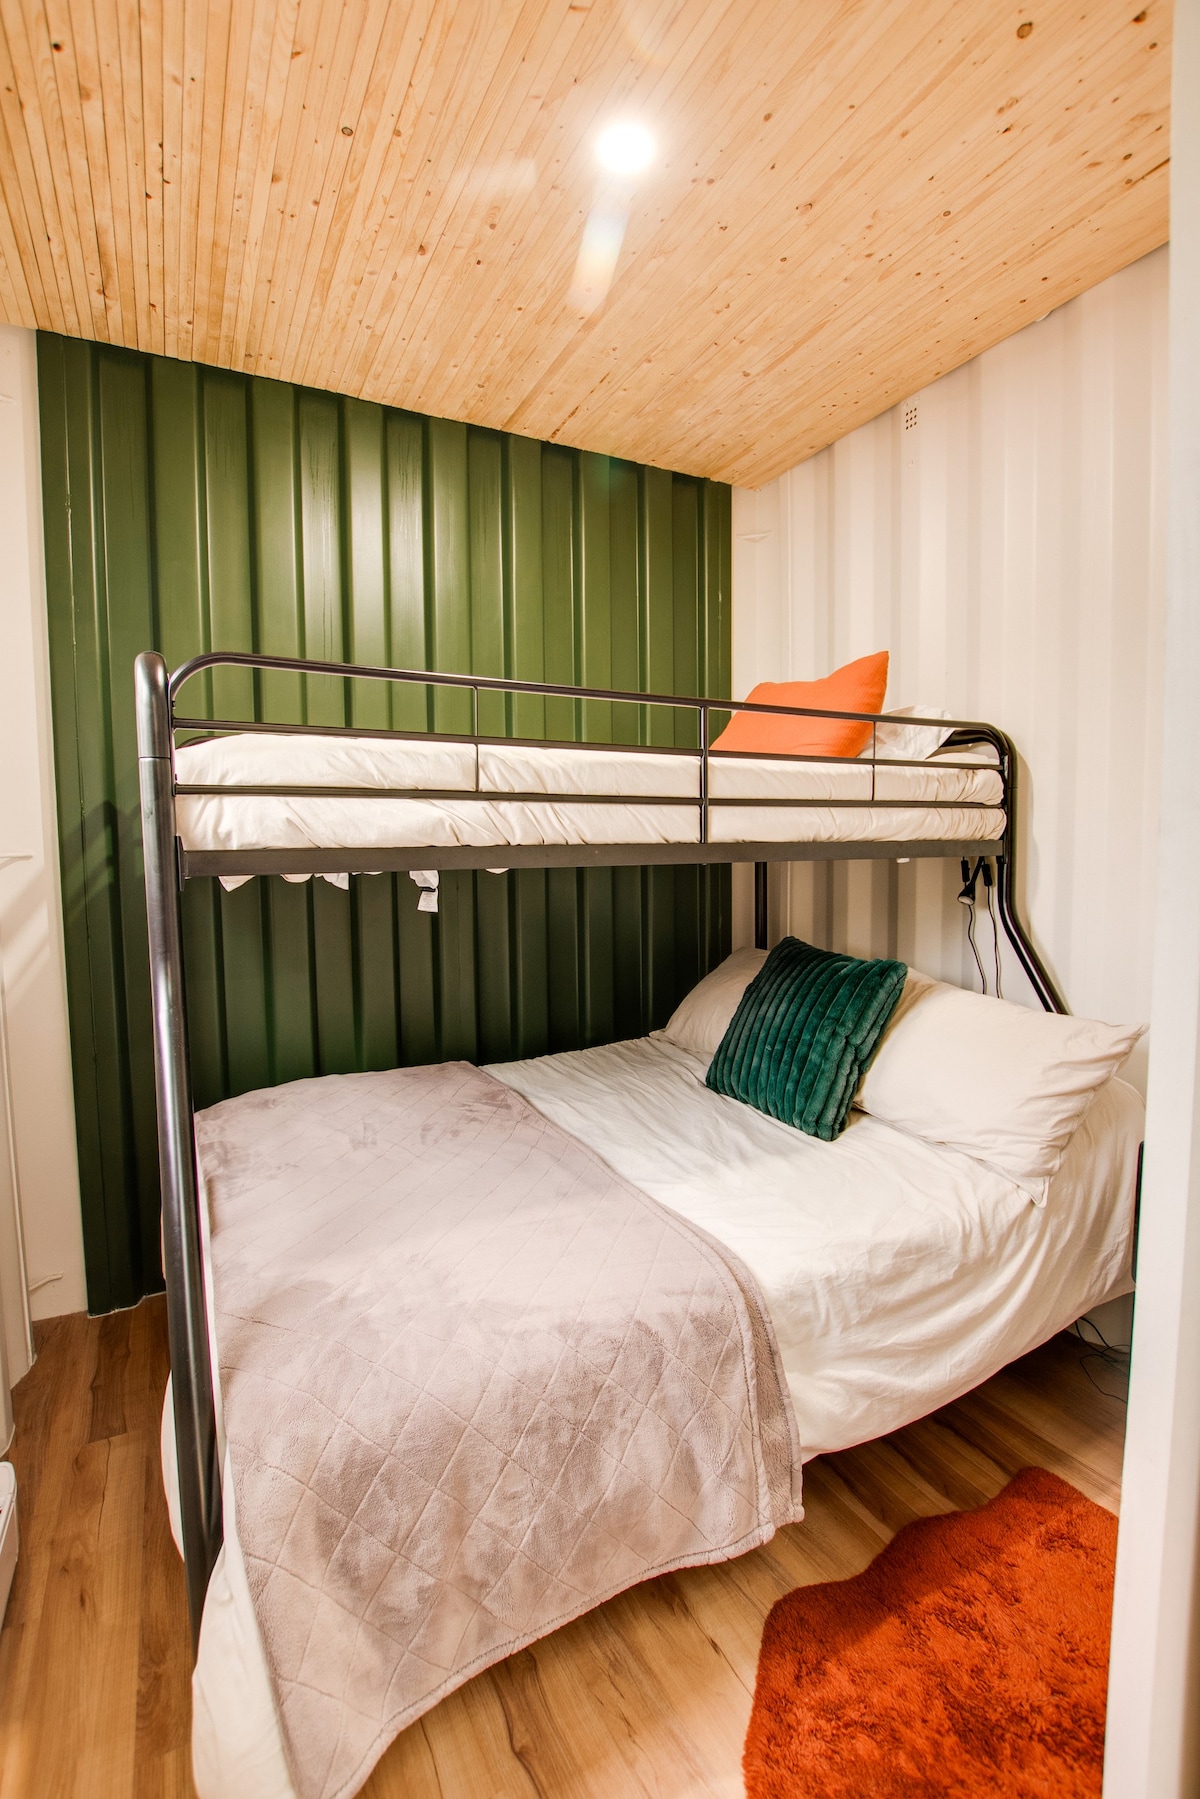 Maple 2 bedroom Shipping Container Cabin